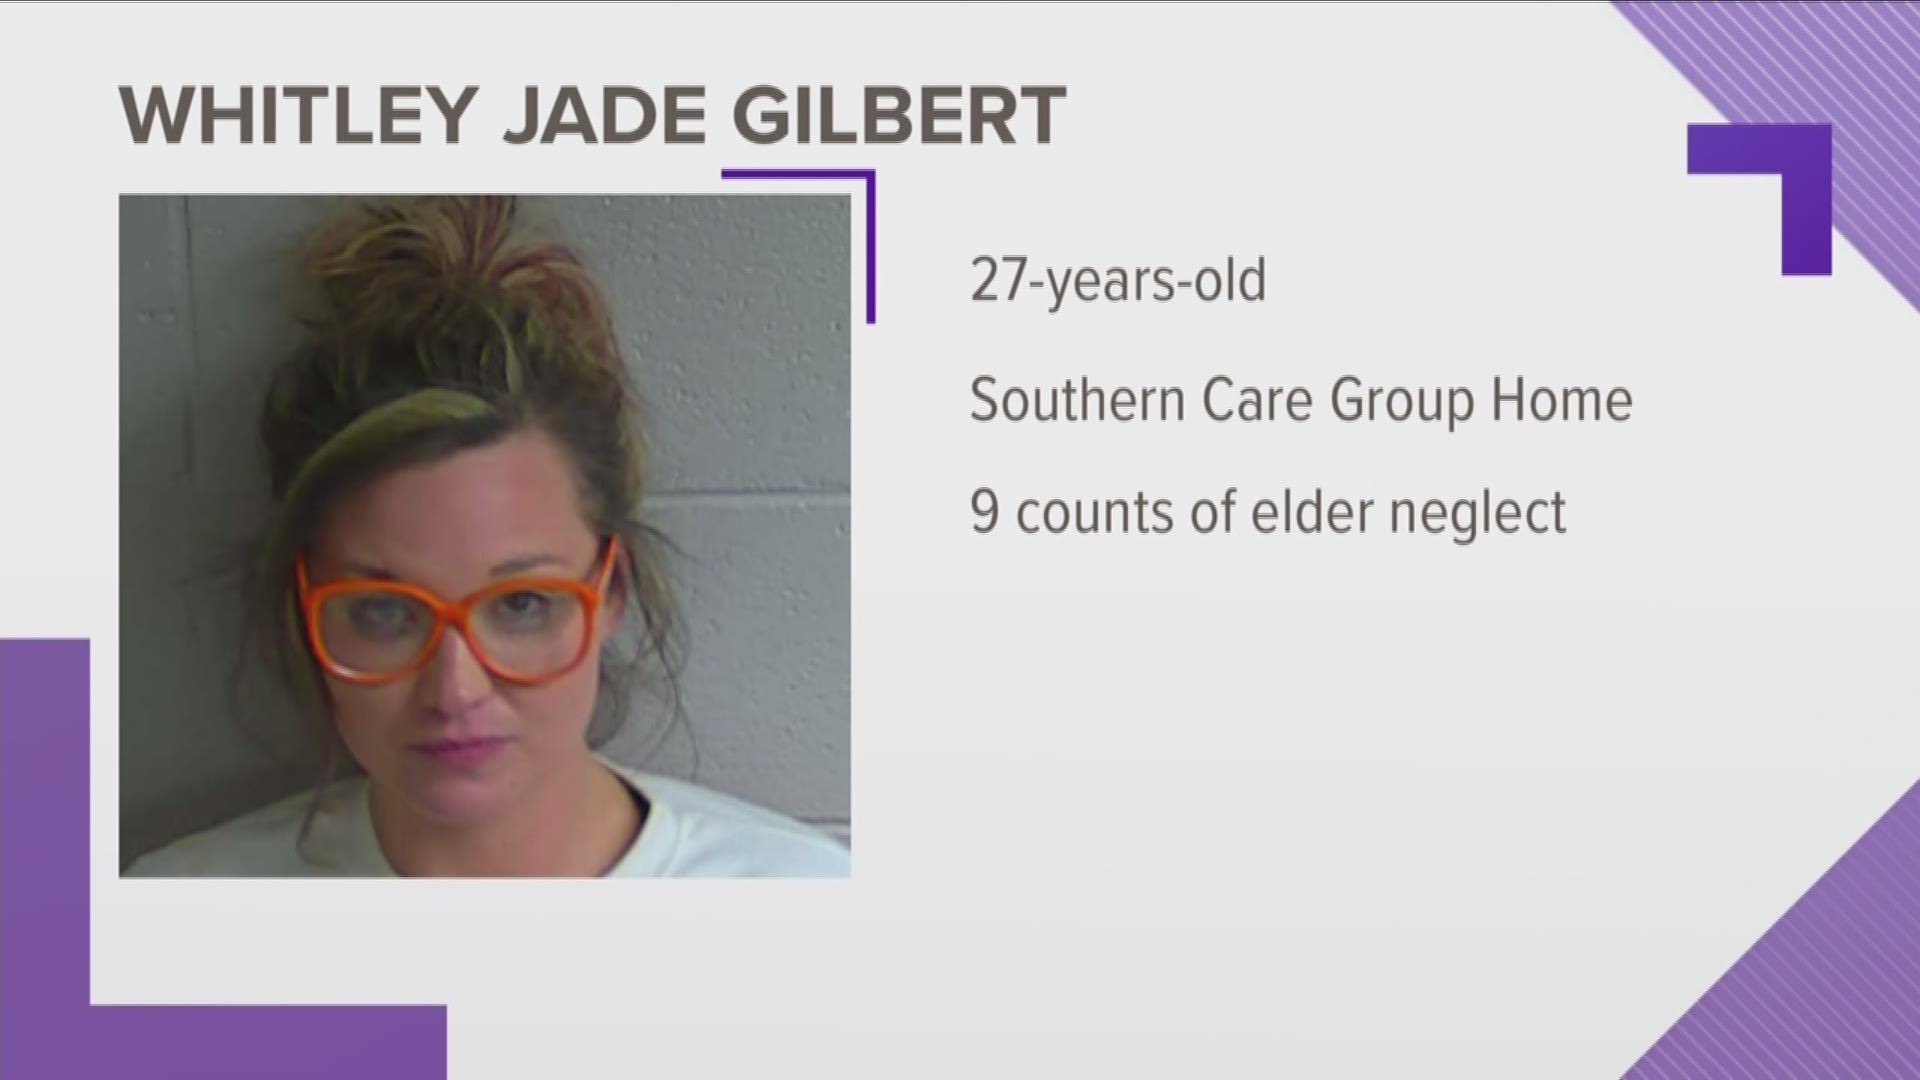 Whitley Jade Glibert of Morristown is charged with 9 counts of elder neglect. Gilbert told us that's not what happened.